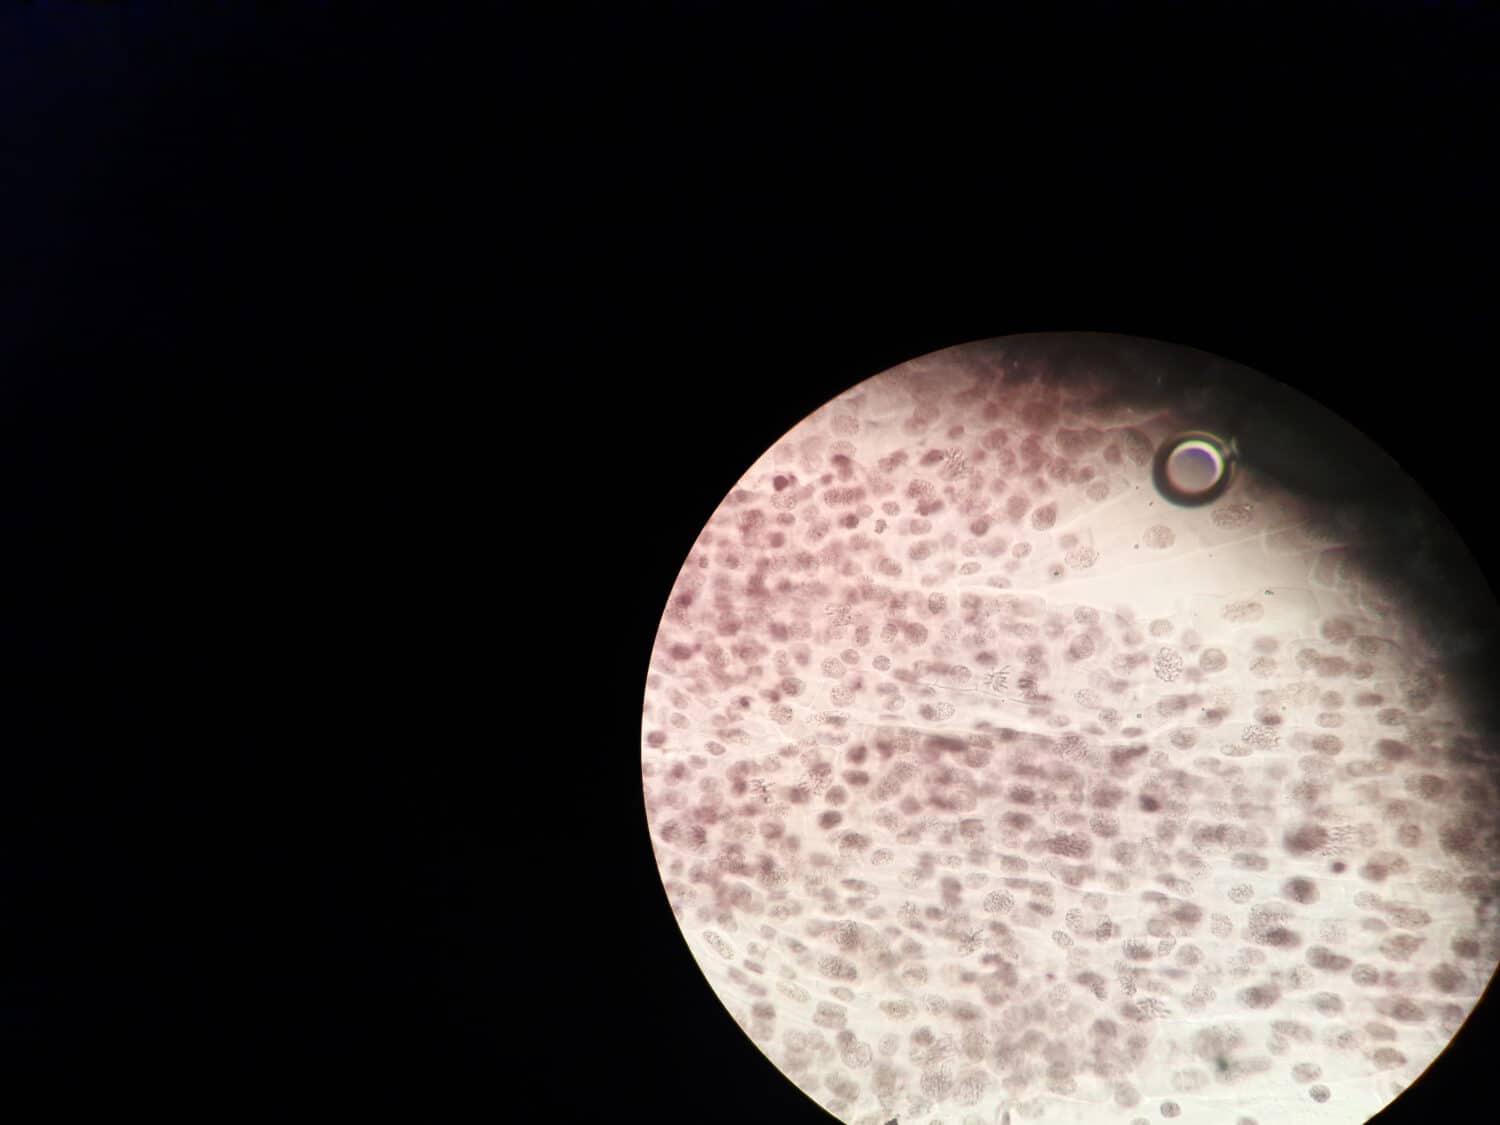 Microscopic image of a onion root showing the telophase stage of cell division